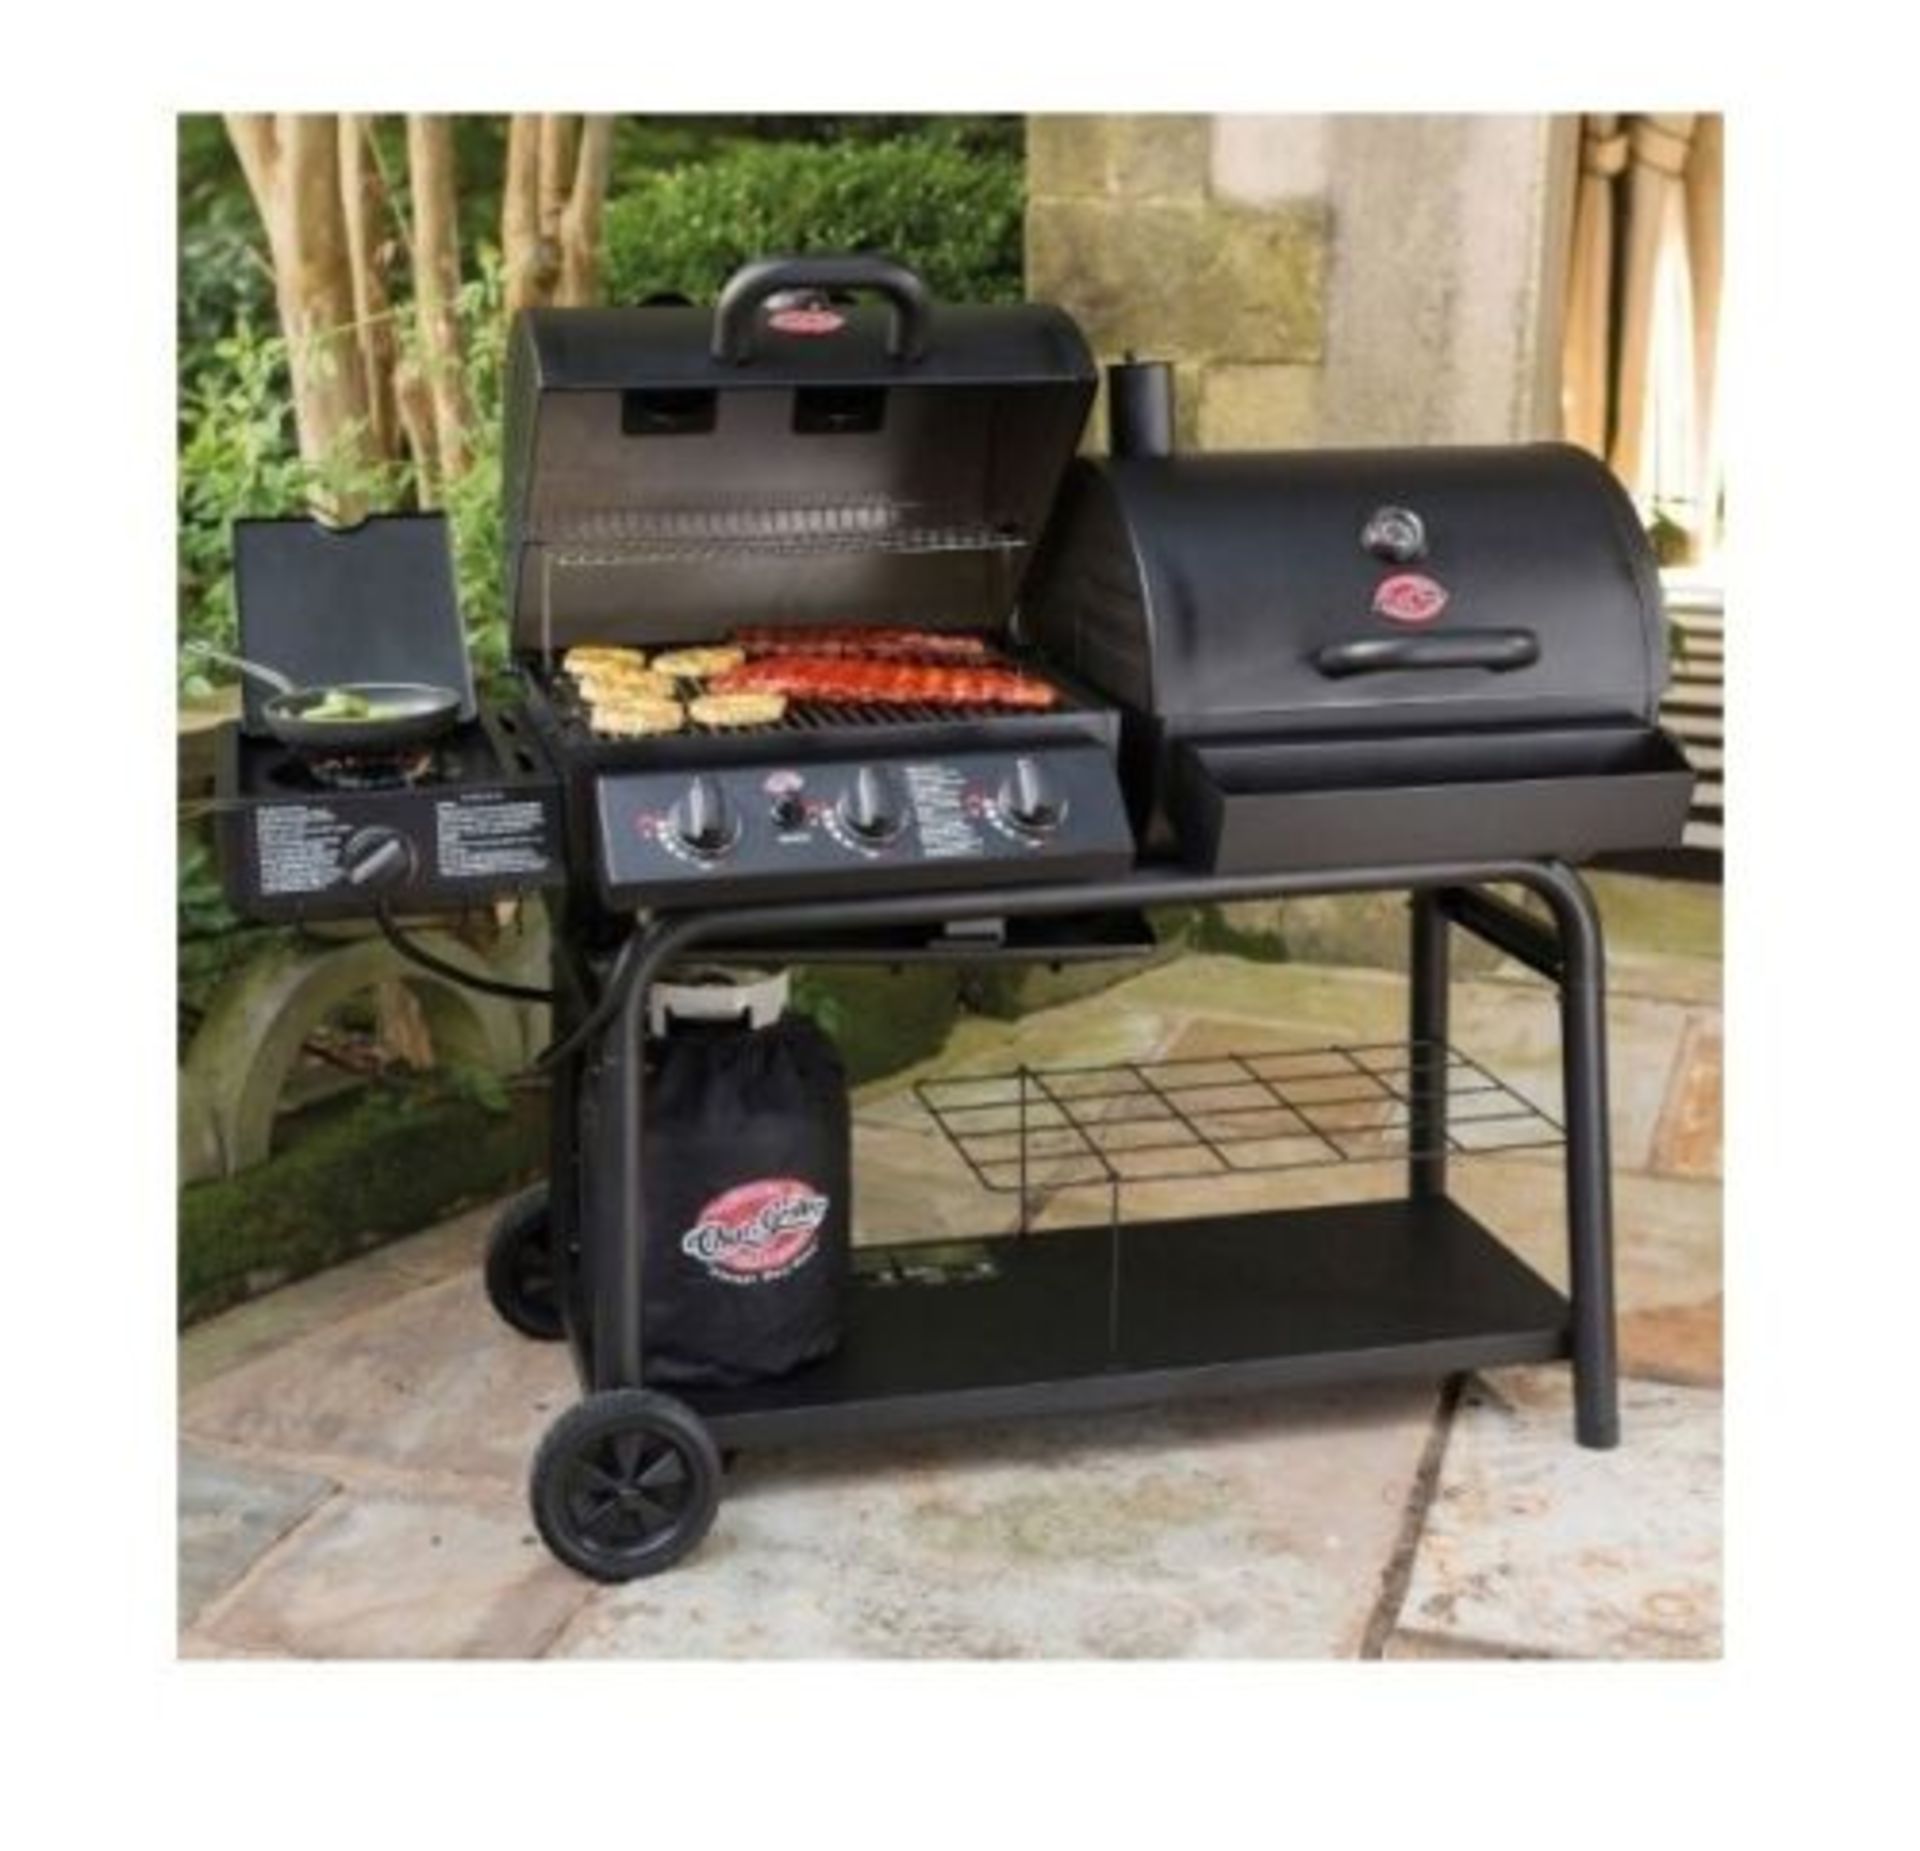 BRAND NEW* CHAR-GRILLER DUO GAS AND CHARCOAL BARBECUE -SIDE BURNER